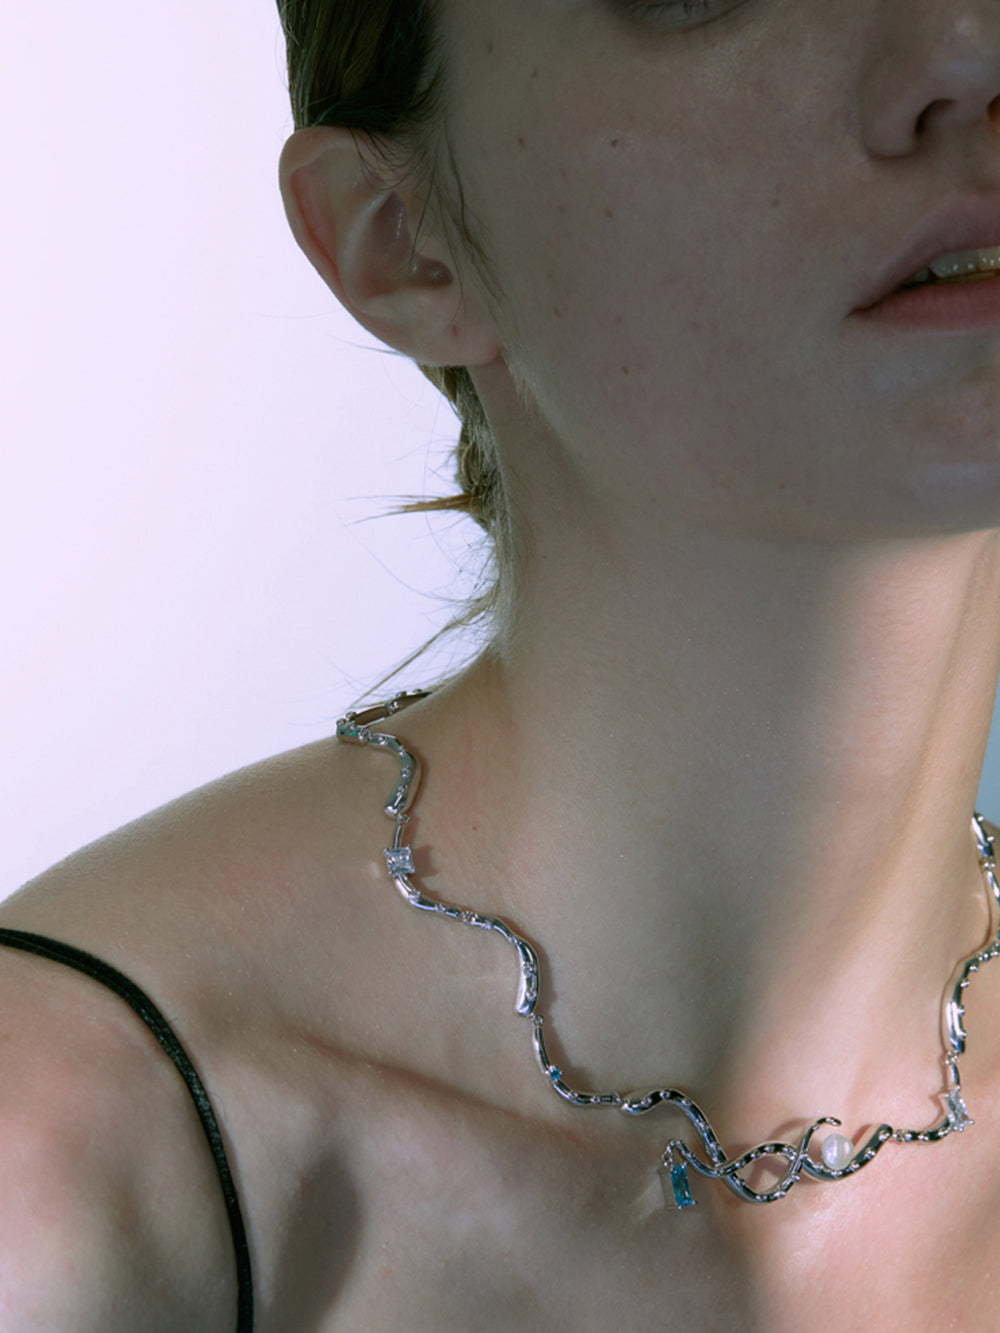 MUKTANK×PEARLONA Oceanic Feel/ Octopus Tentacles Wave Choker Necklace with Baroque Pearl